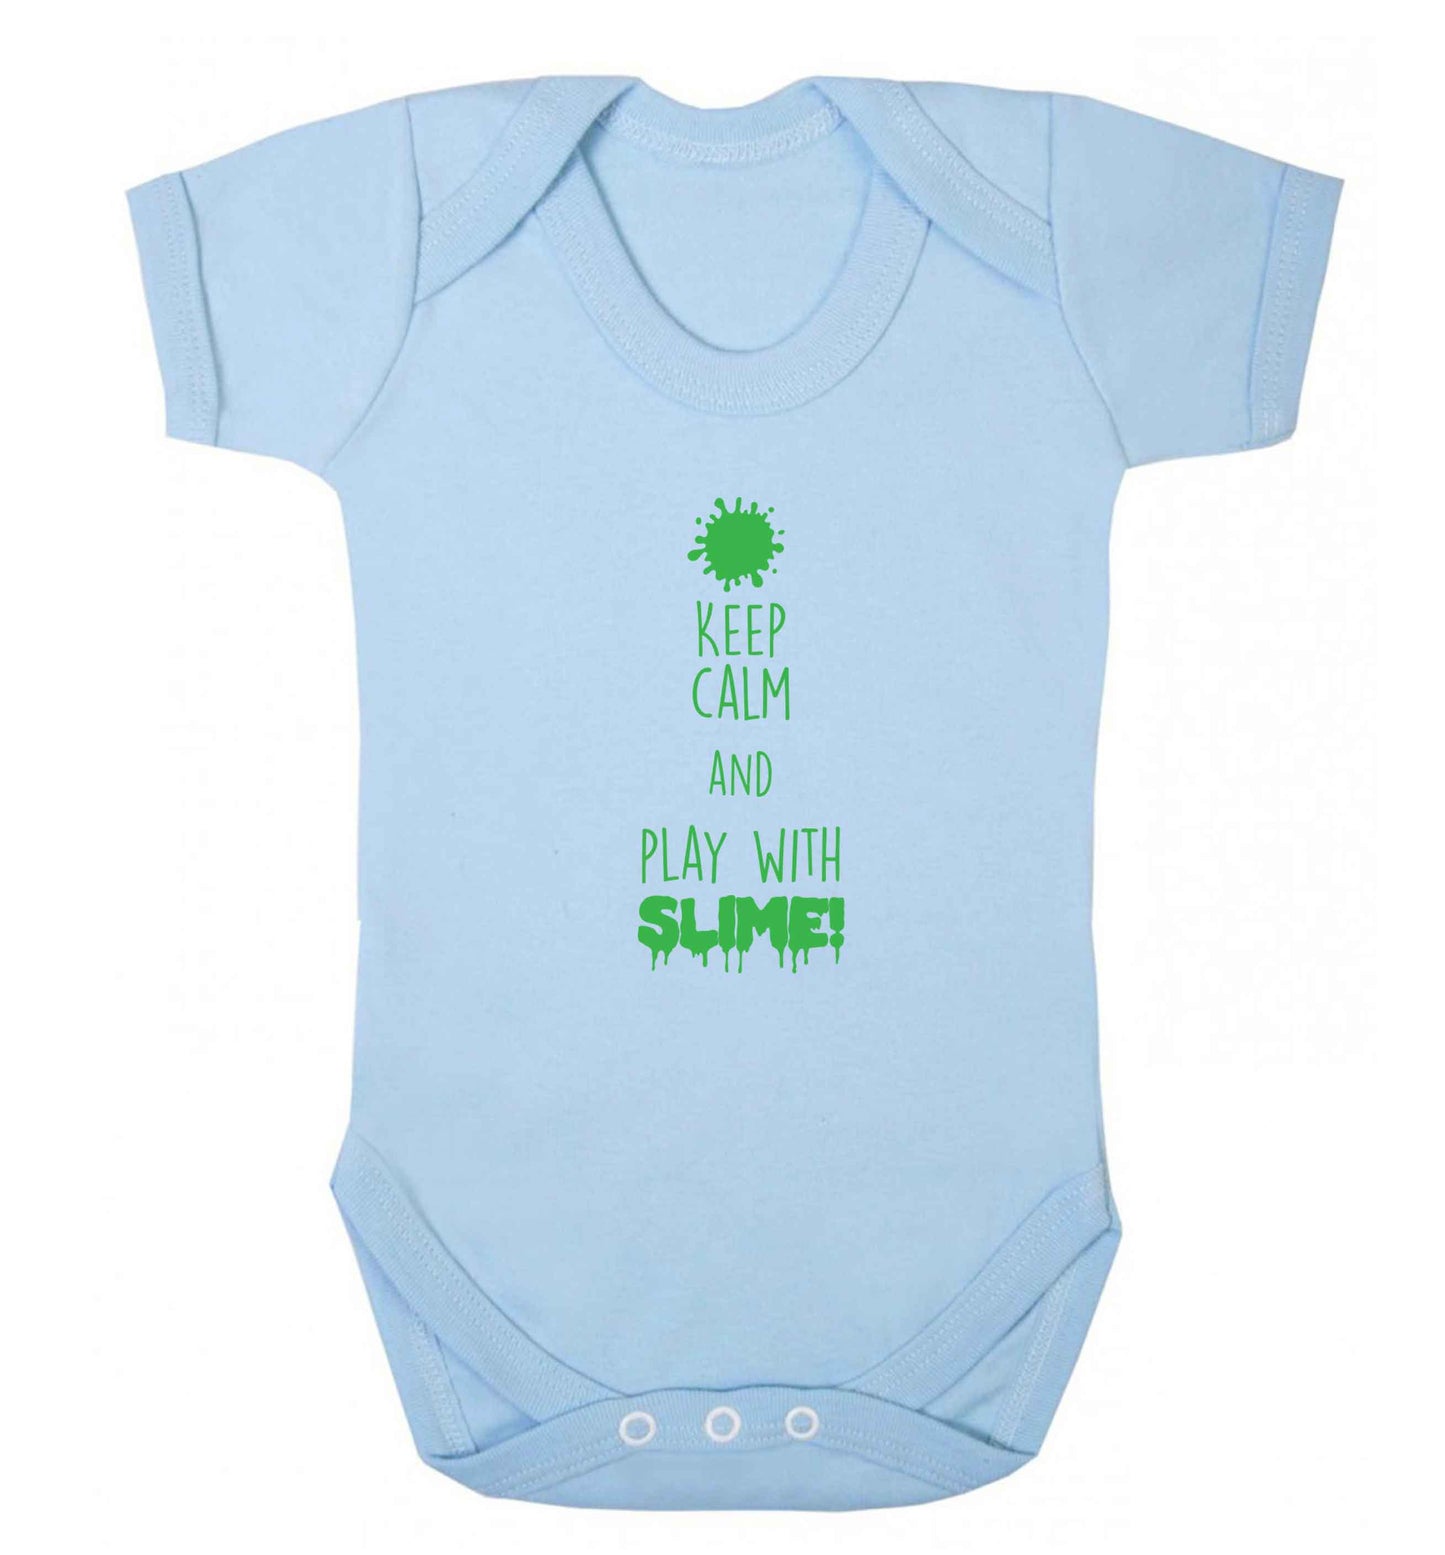 Neon green keep calm and play with slime!baby vest pale blue 18-24 months